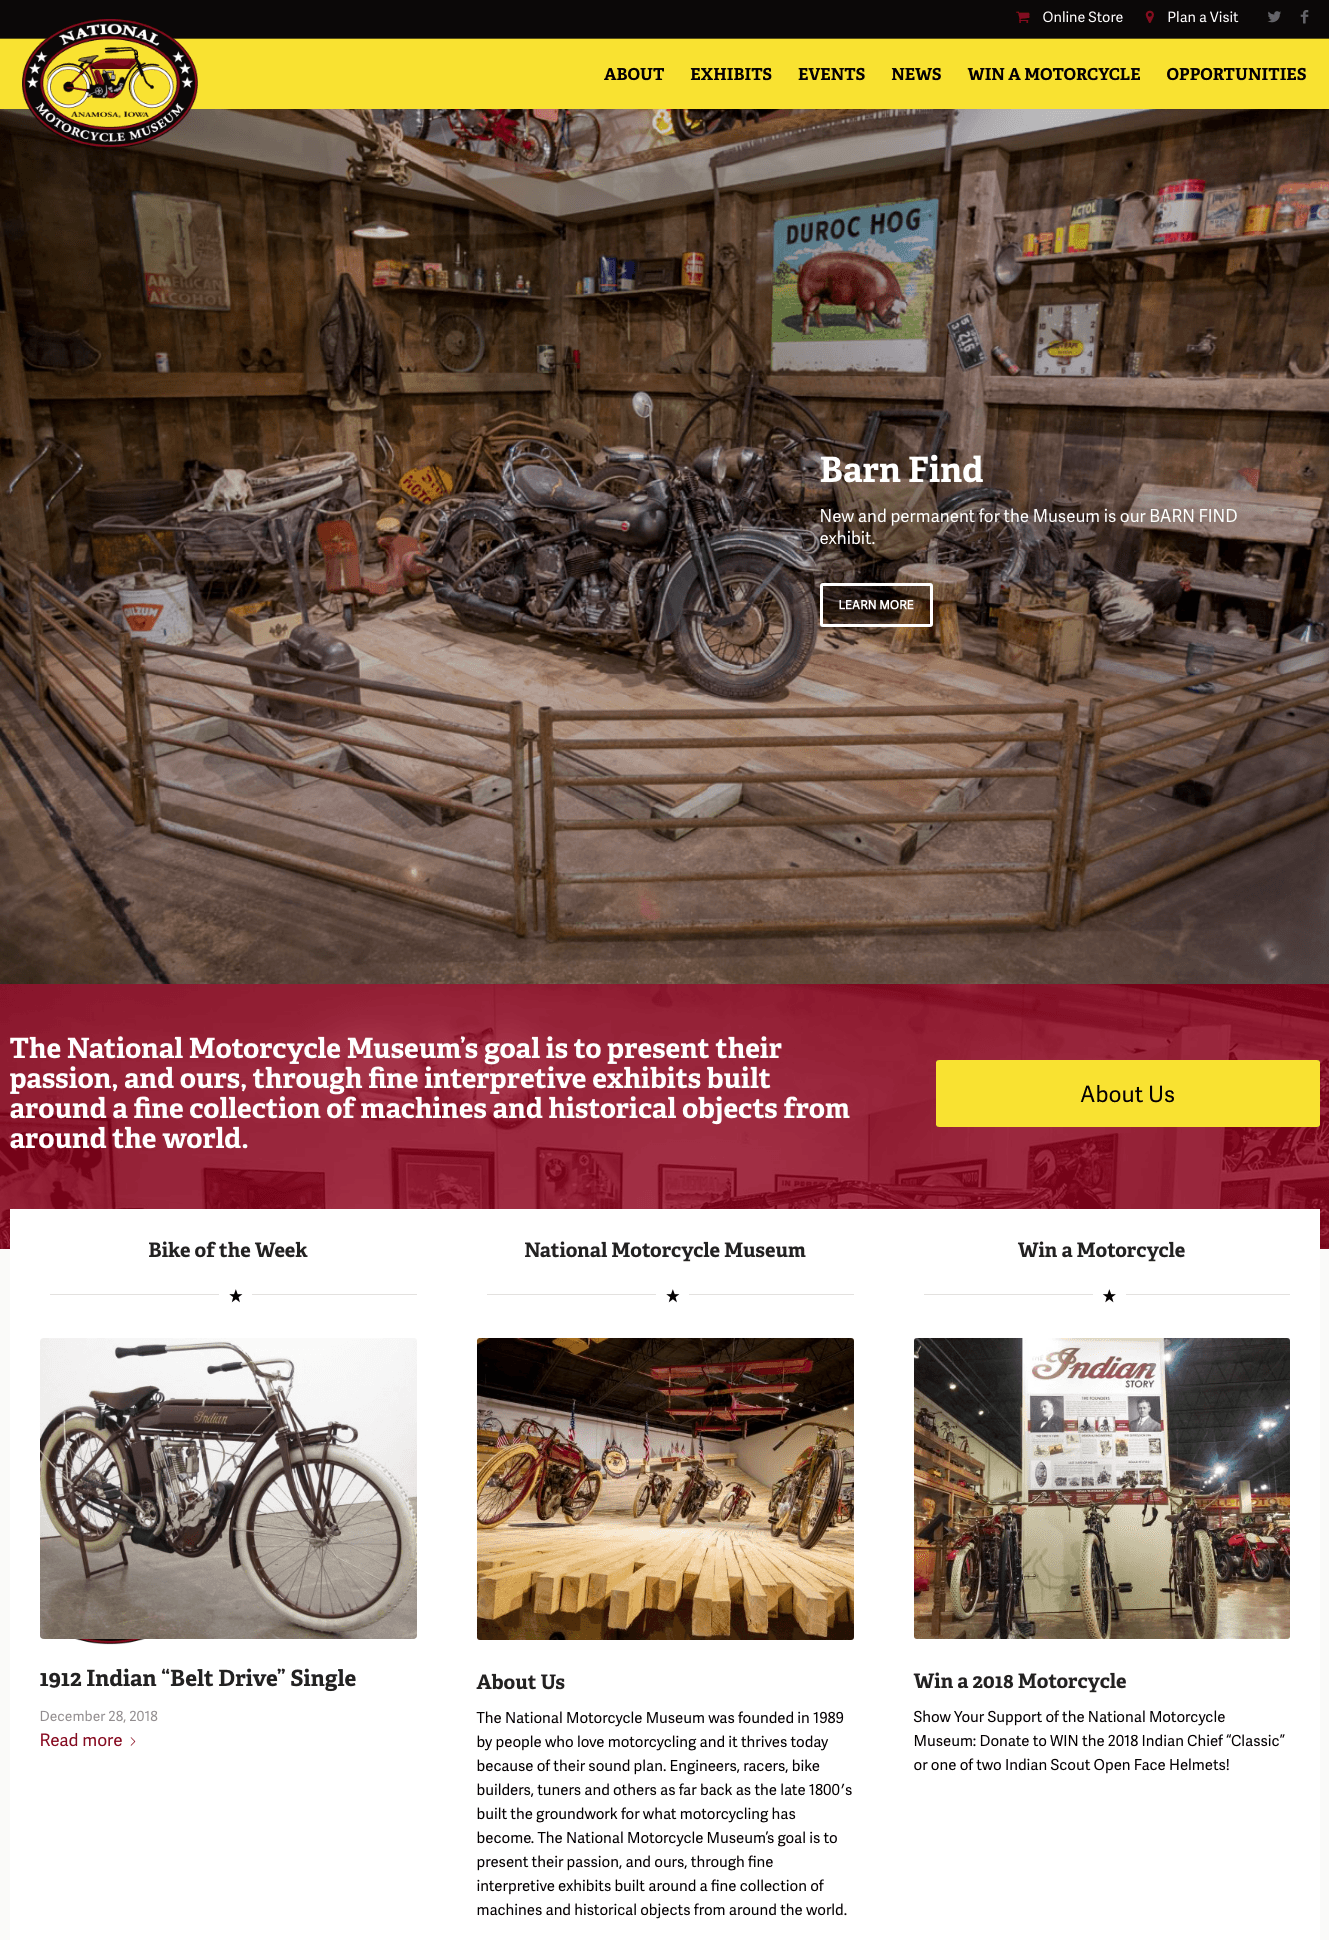 Homepage of the National Motorcycle Museum Website